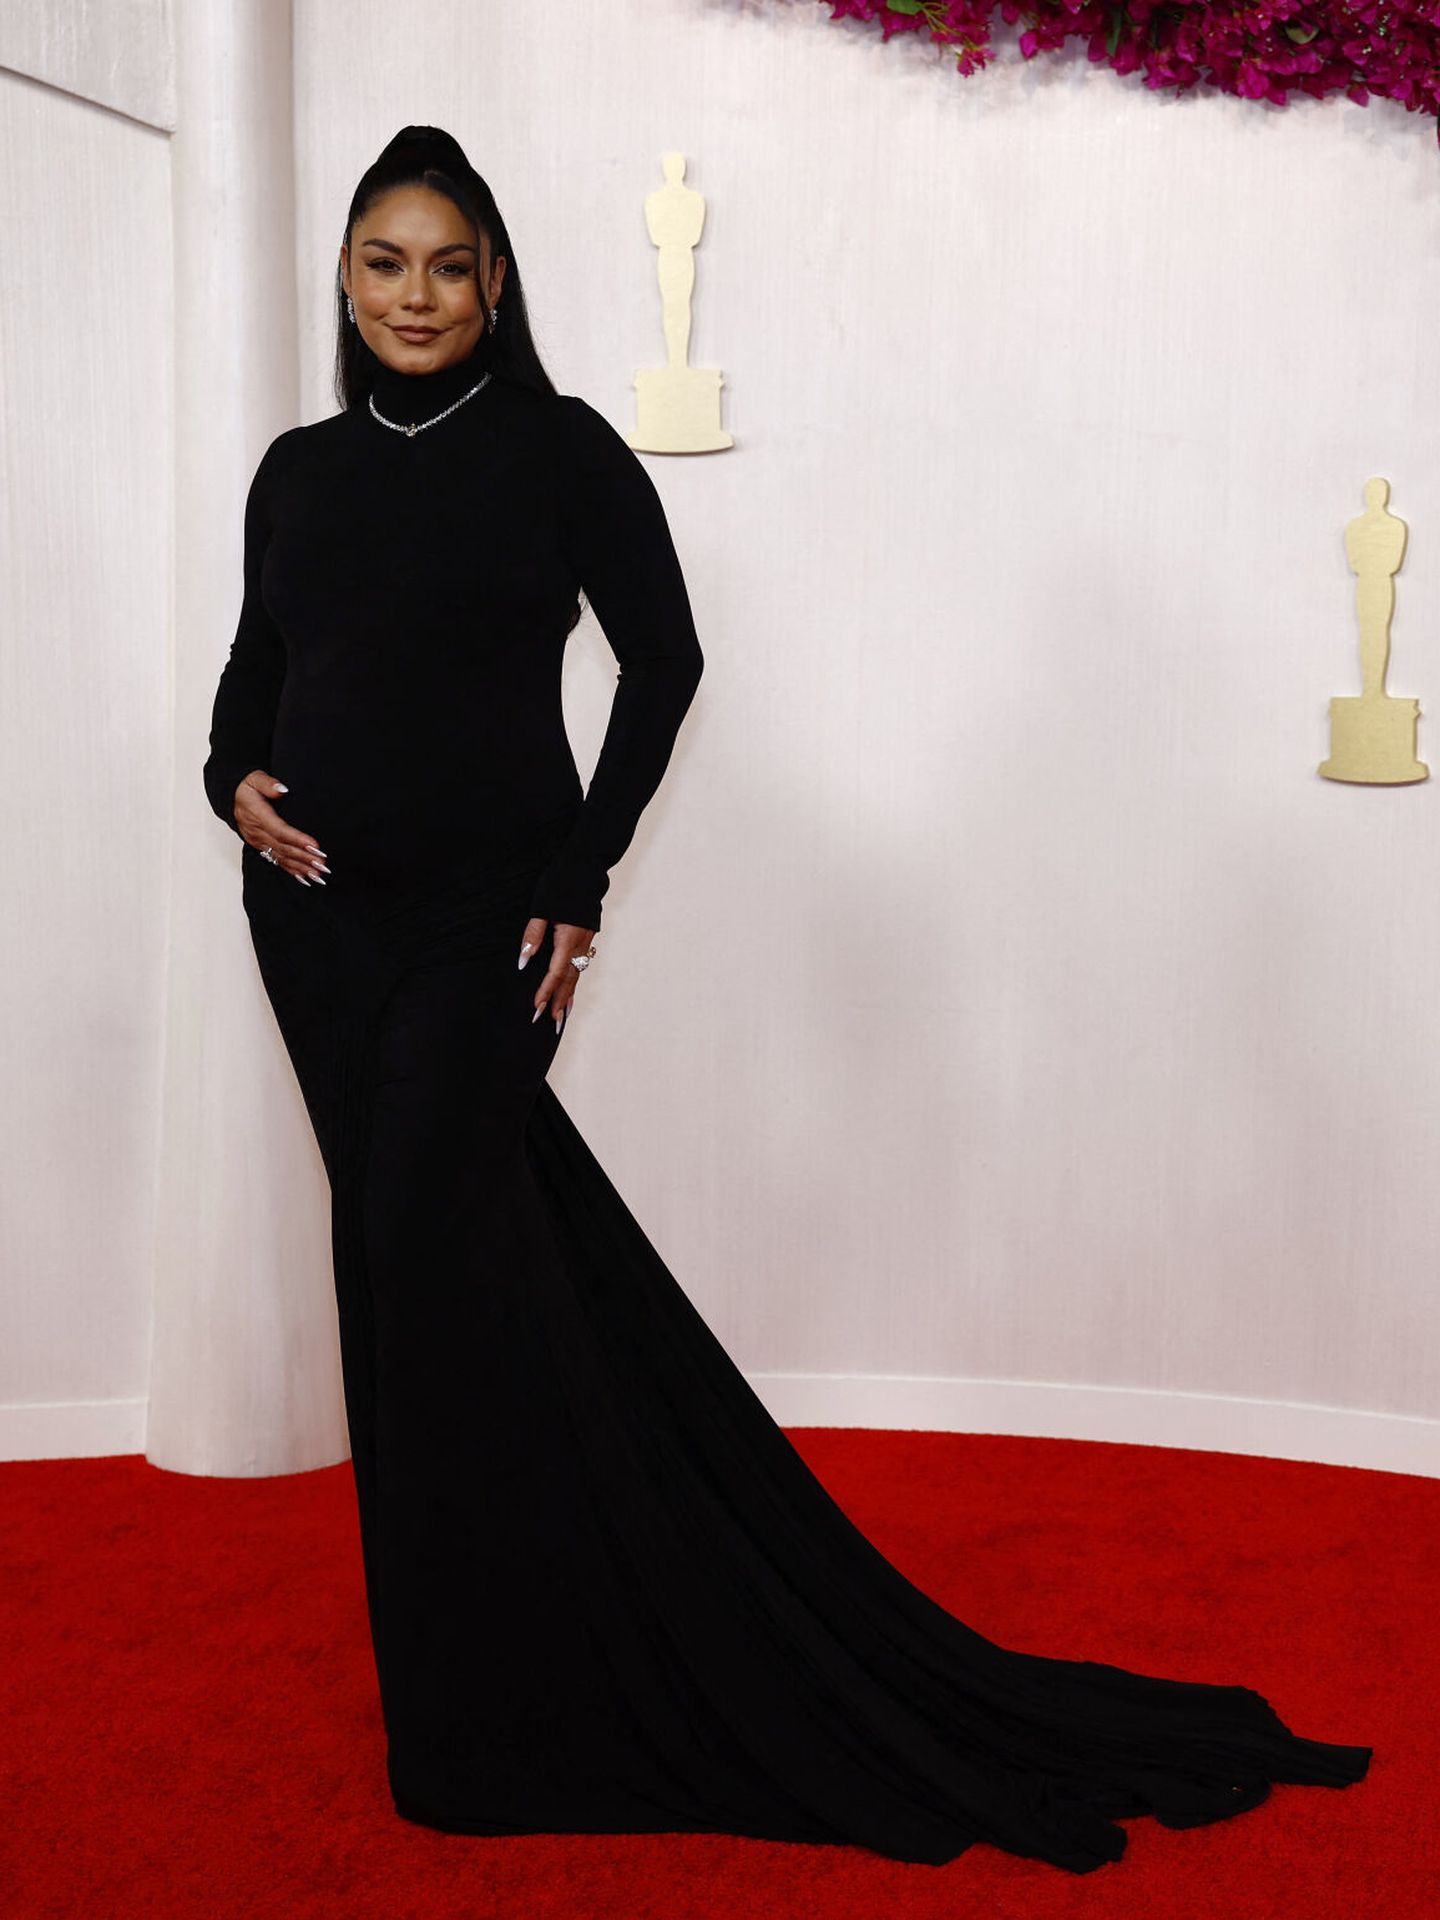 Vanessa Hudgens, who is pregnant, poses on the red carpet during the Oscars arrivals at the 96th Academy Awards in Hollywood, Los Angeles, California, U.S., March 10, 2024. REUTERS Sarah Meyssonnier